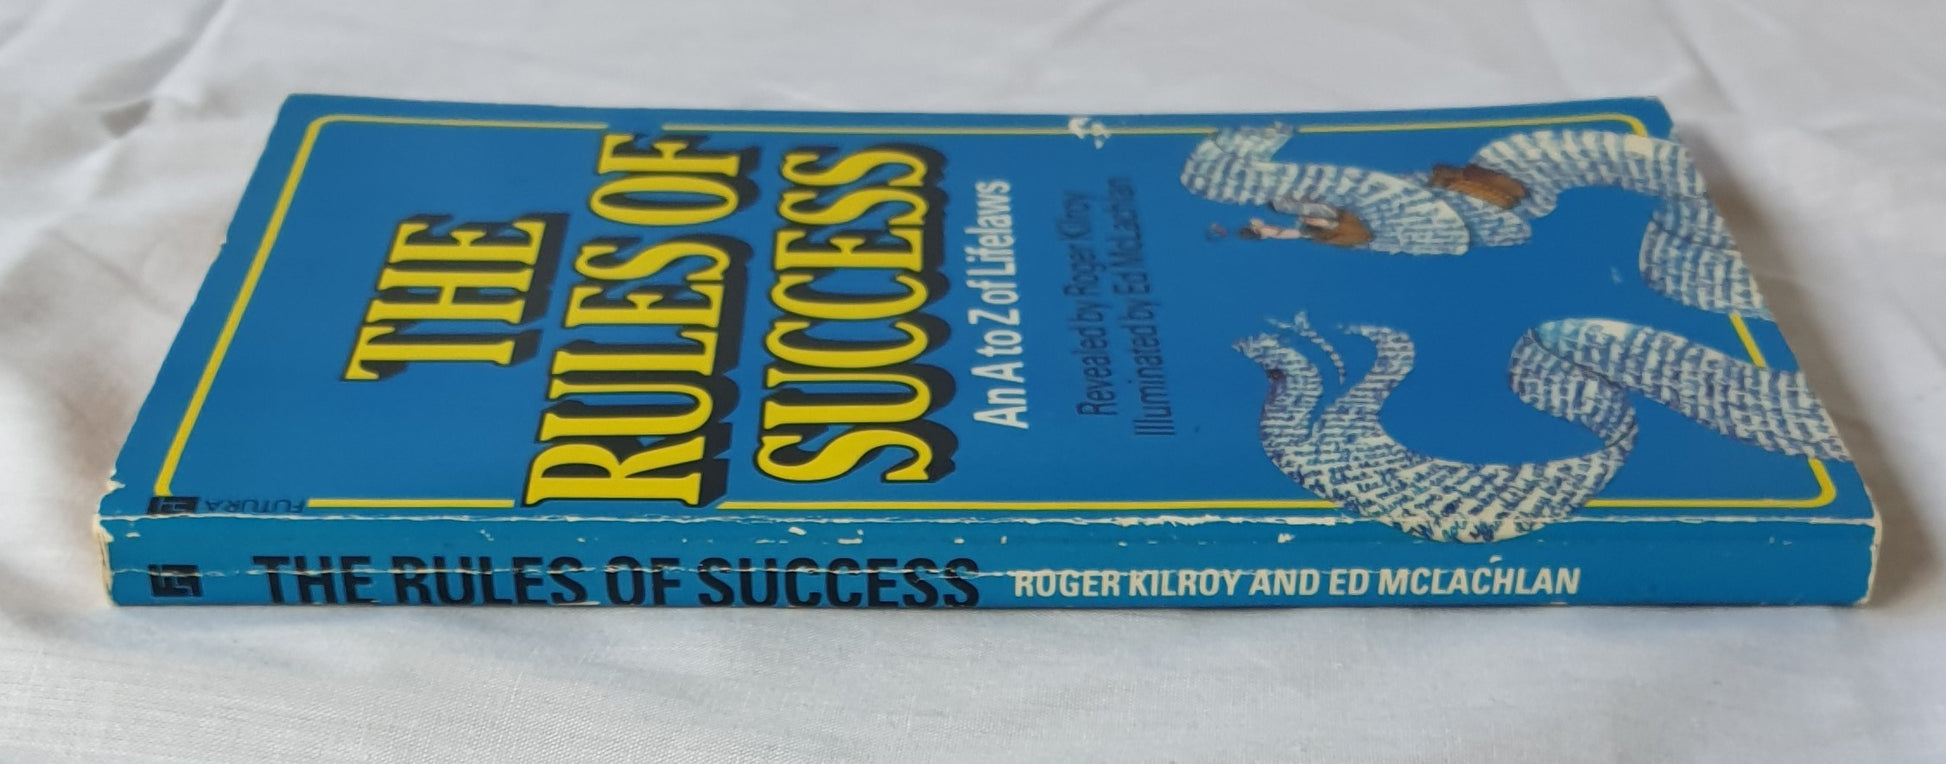 The Rules of Success  An A to Z of Lifelaws  by Roger Kilroy  Illustrated by Ed McLachlan